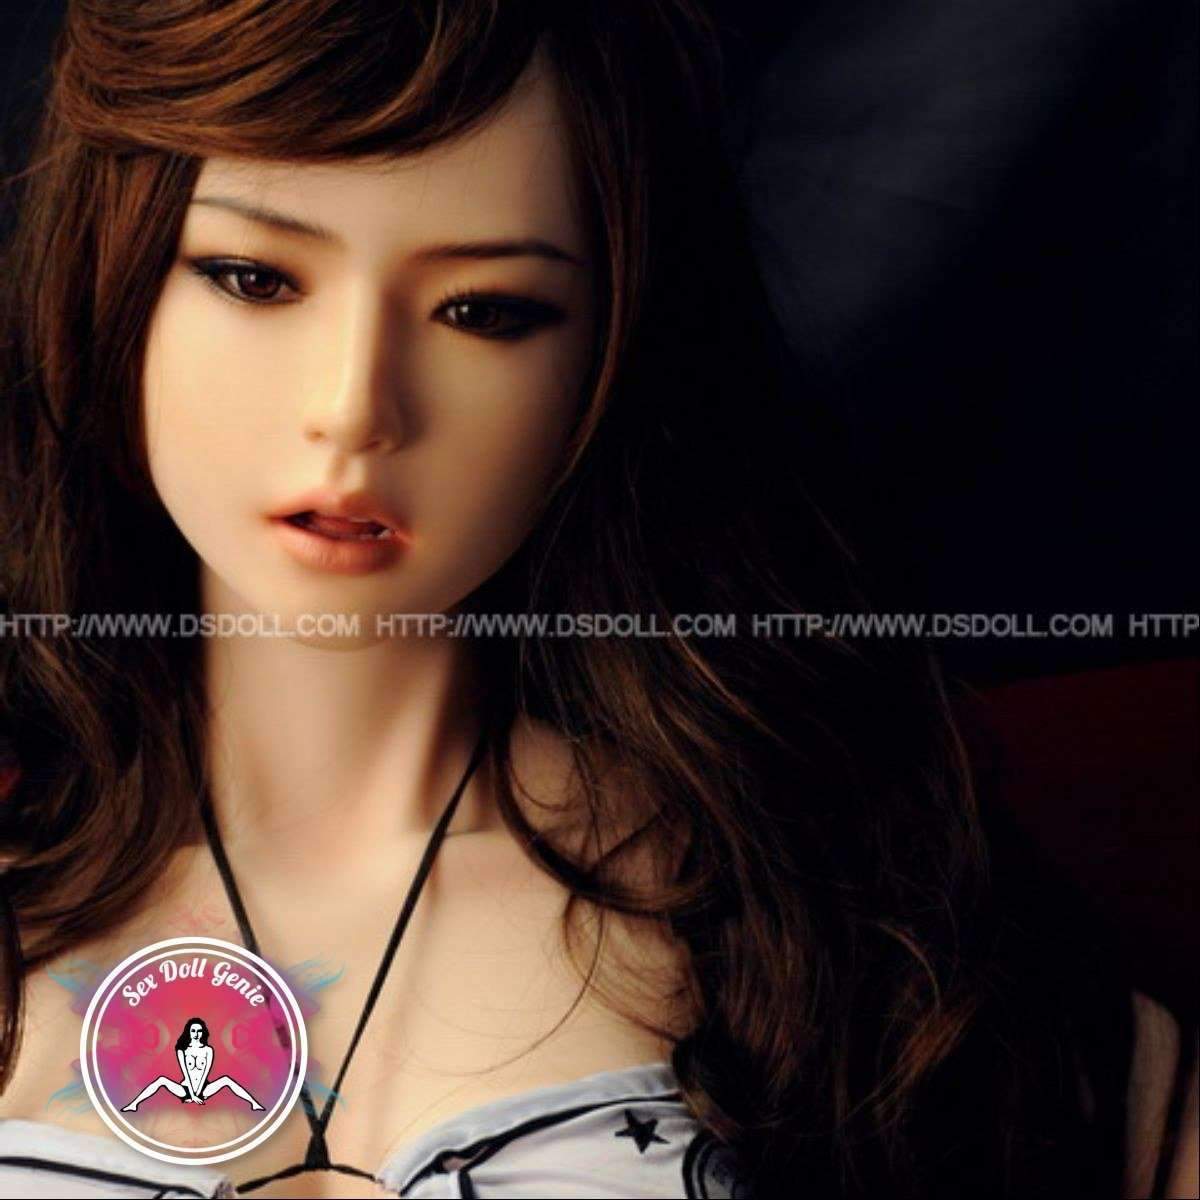 DS Doll - 160Plus - Kayla Head - Type 2 D Cup Silicone Doll-36